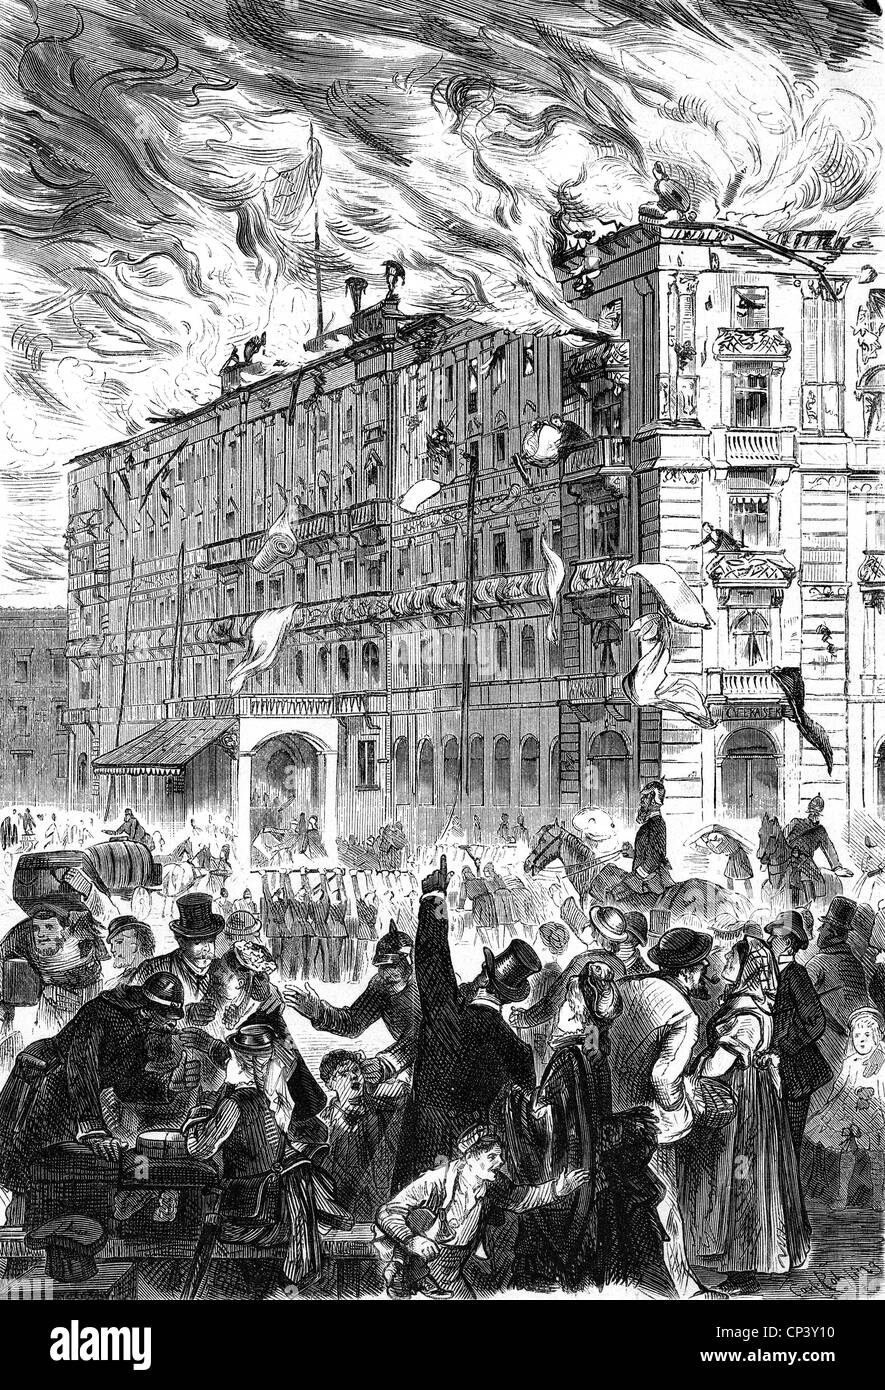 fire, fires, fire of Hotel Kaiserhof in Berlin, 11.10.1875, wood engraving, 'Illustrierte Zeitung', Leipzig, 1875, , Additional-Rights-Clearences-Not Available Stock Photo